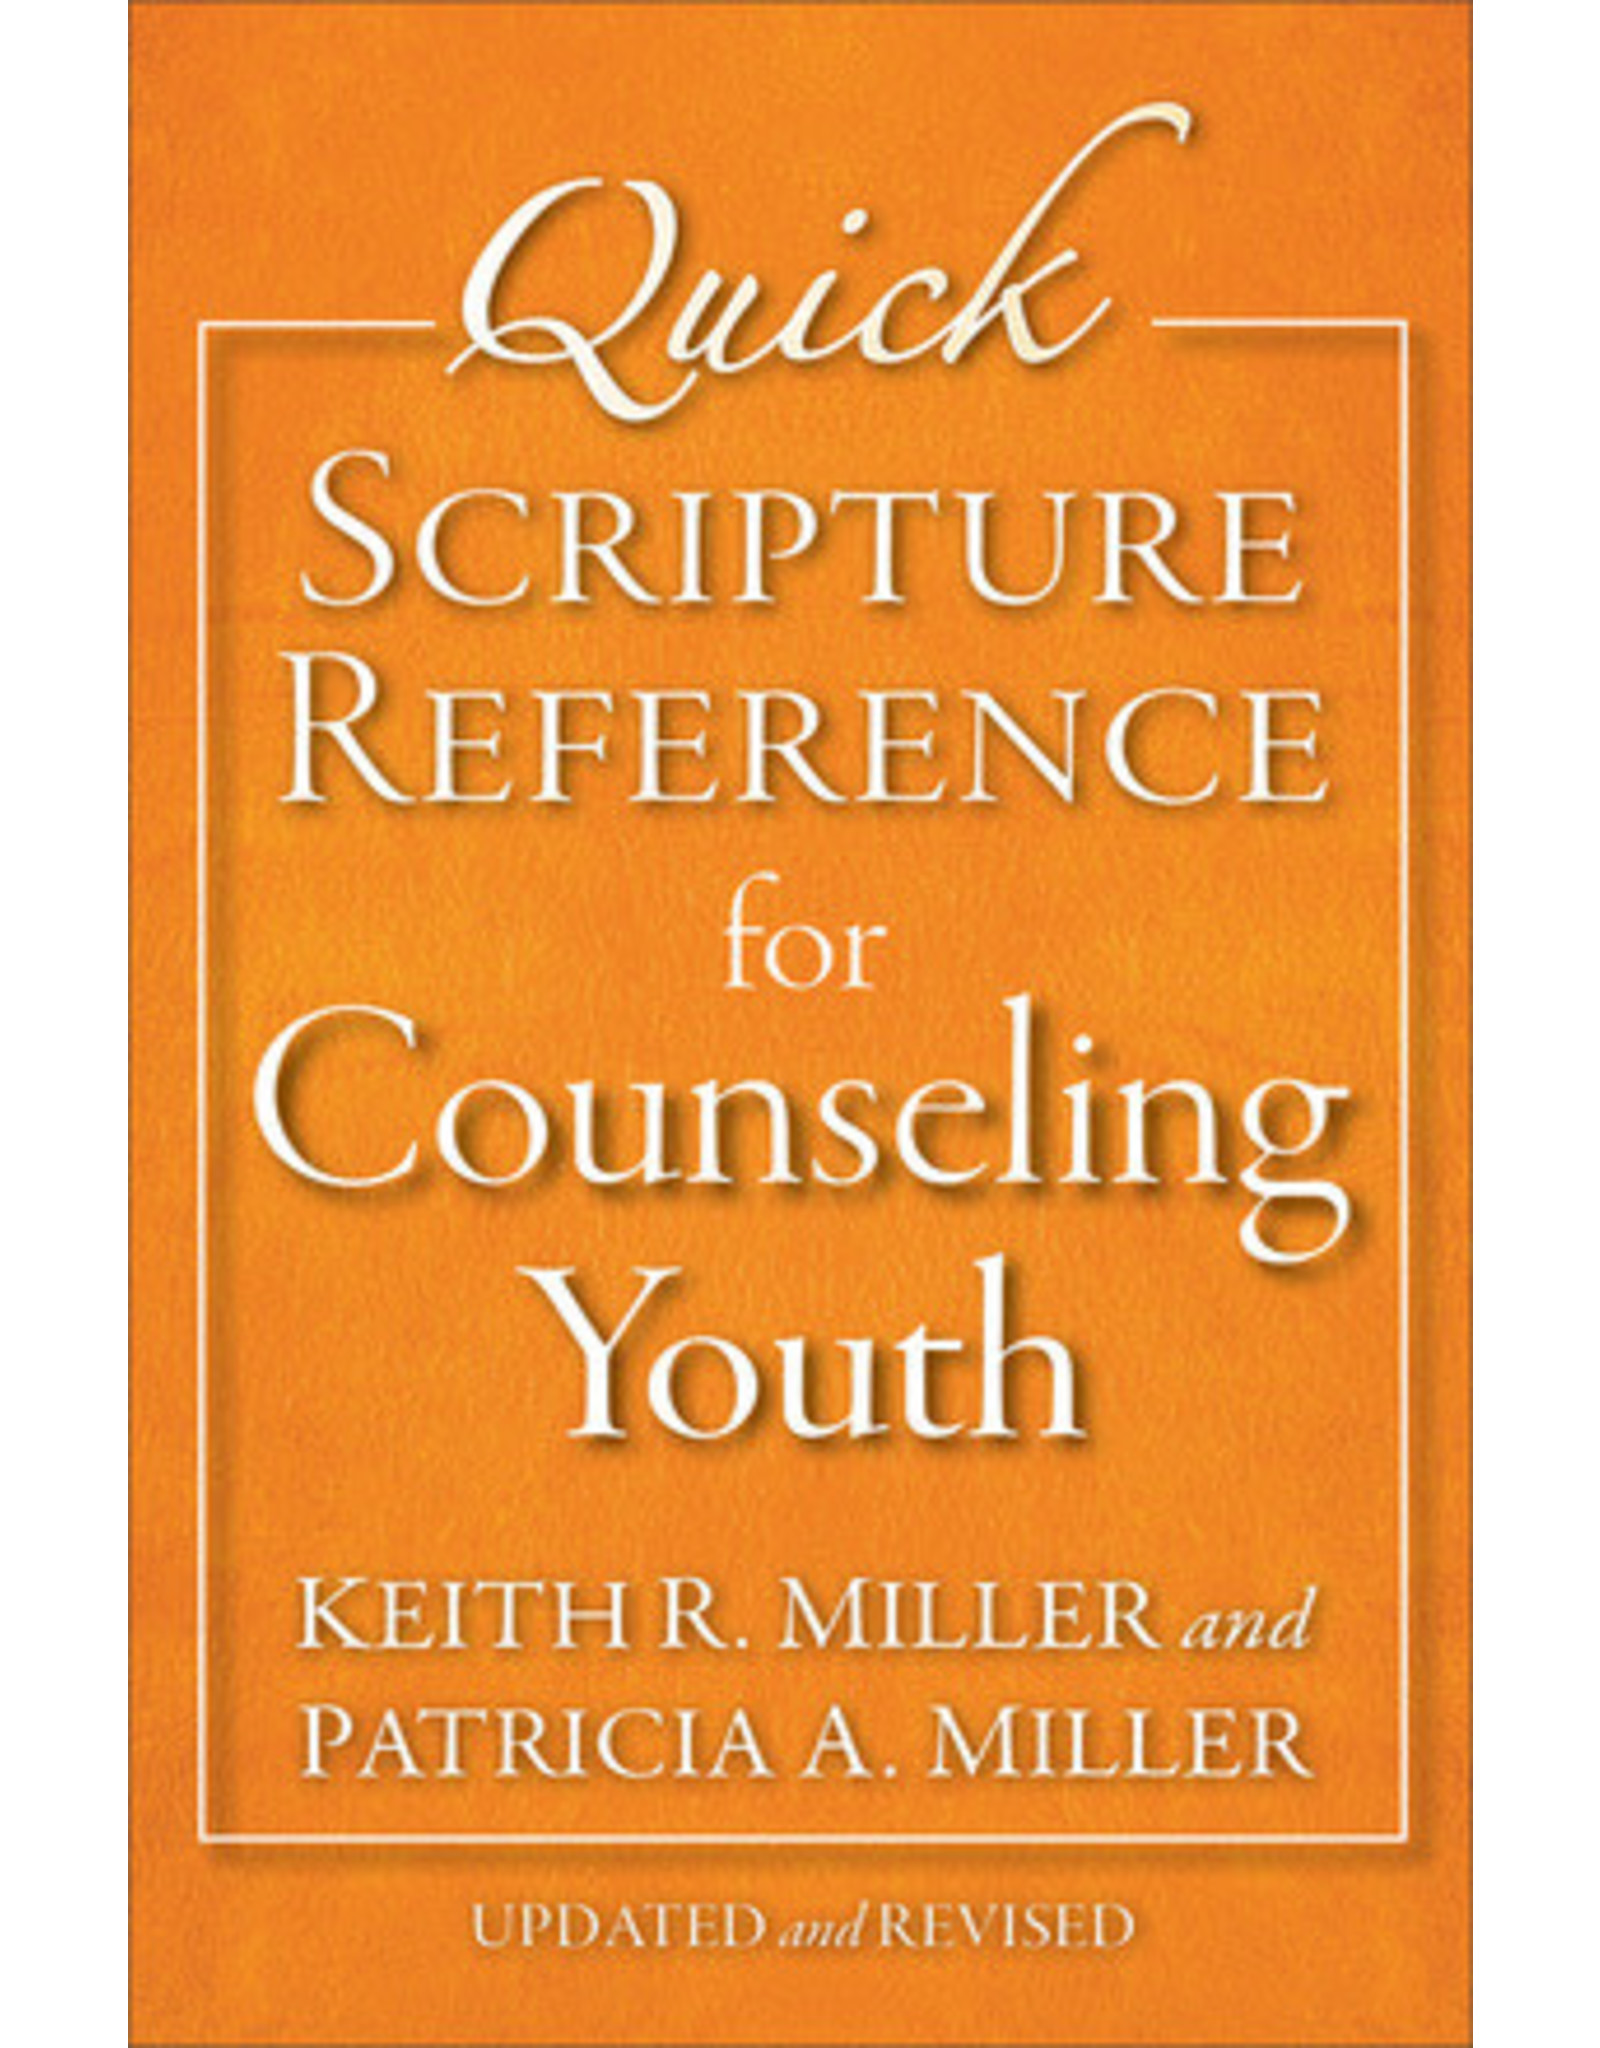 Patricia A. Miller Quick Scripture Reference for Counseling Youth